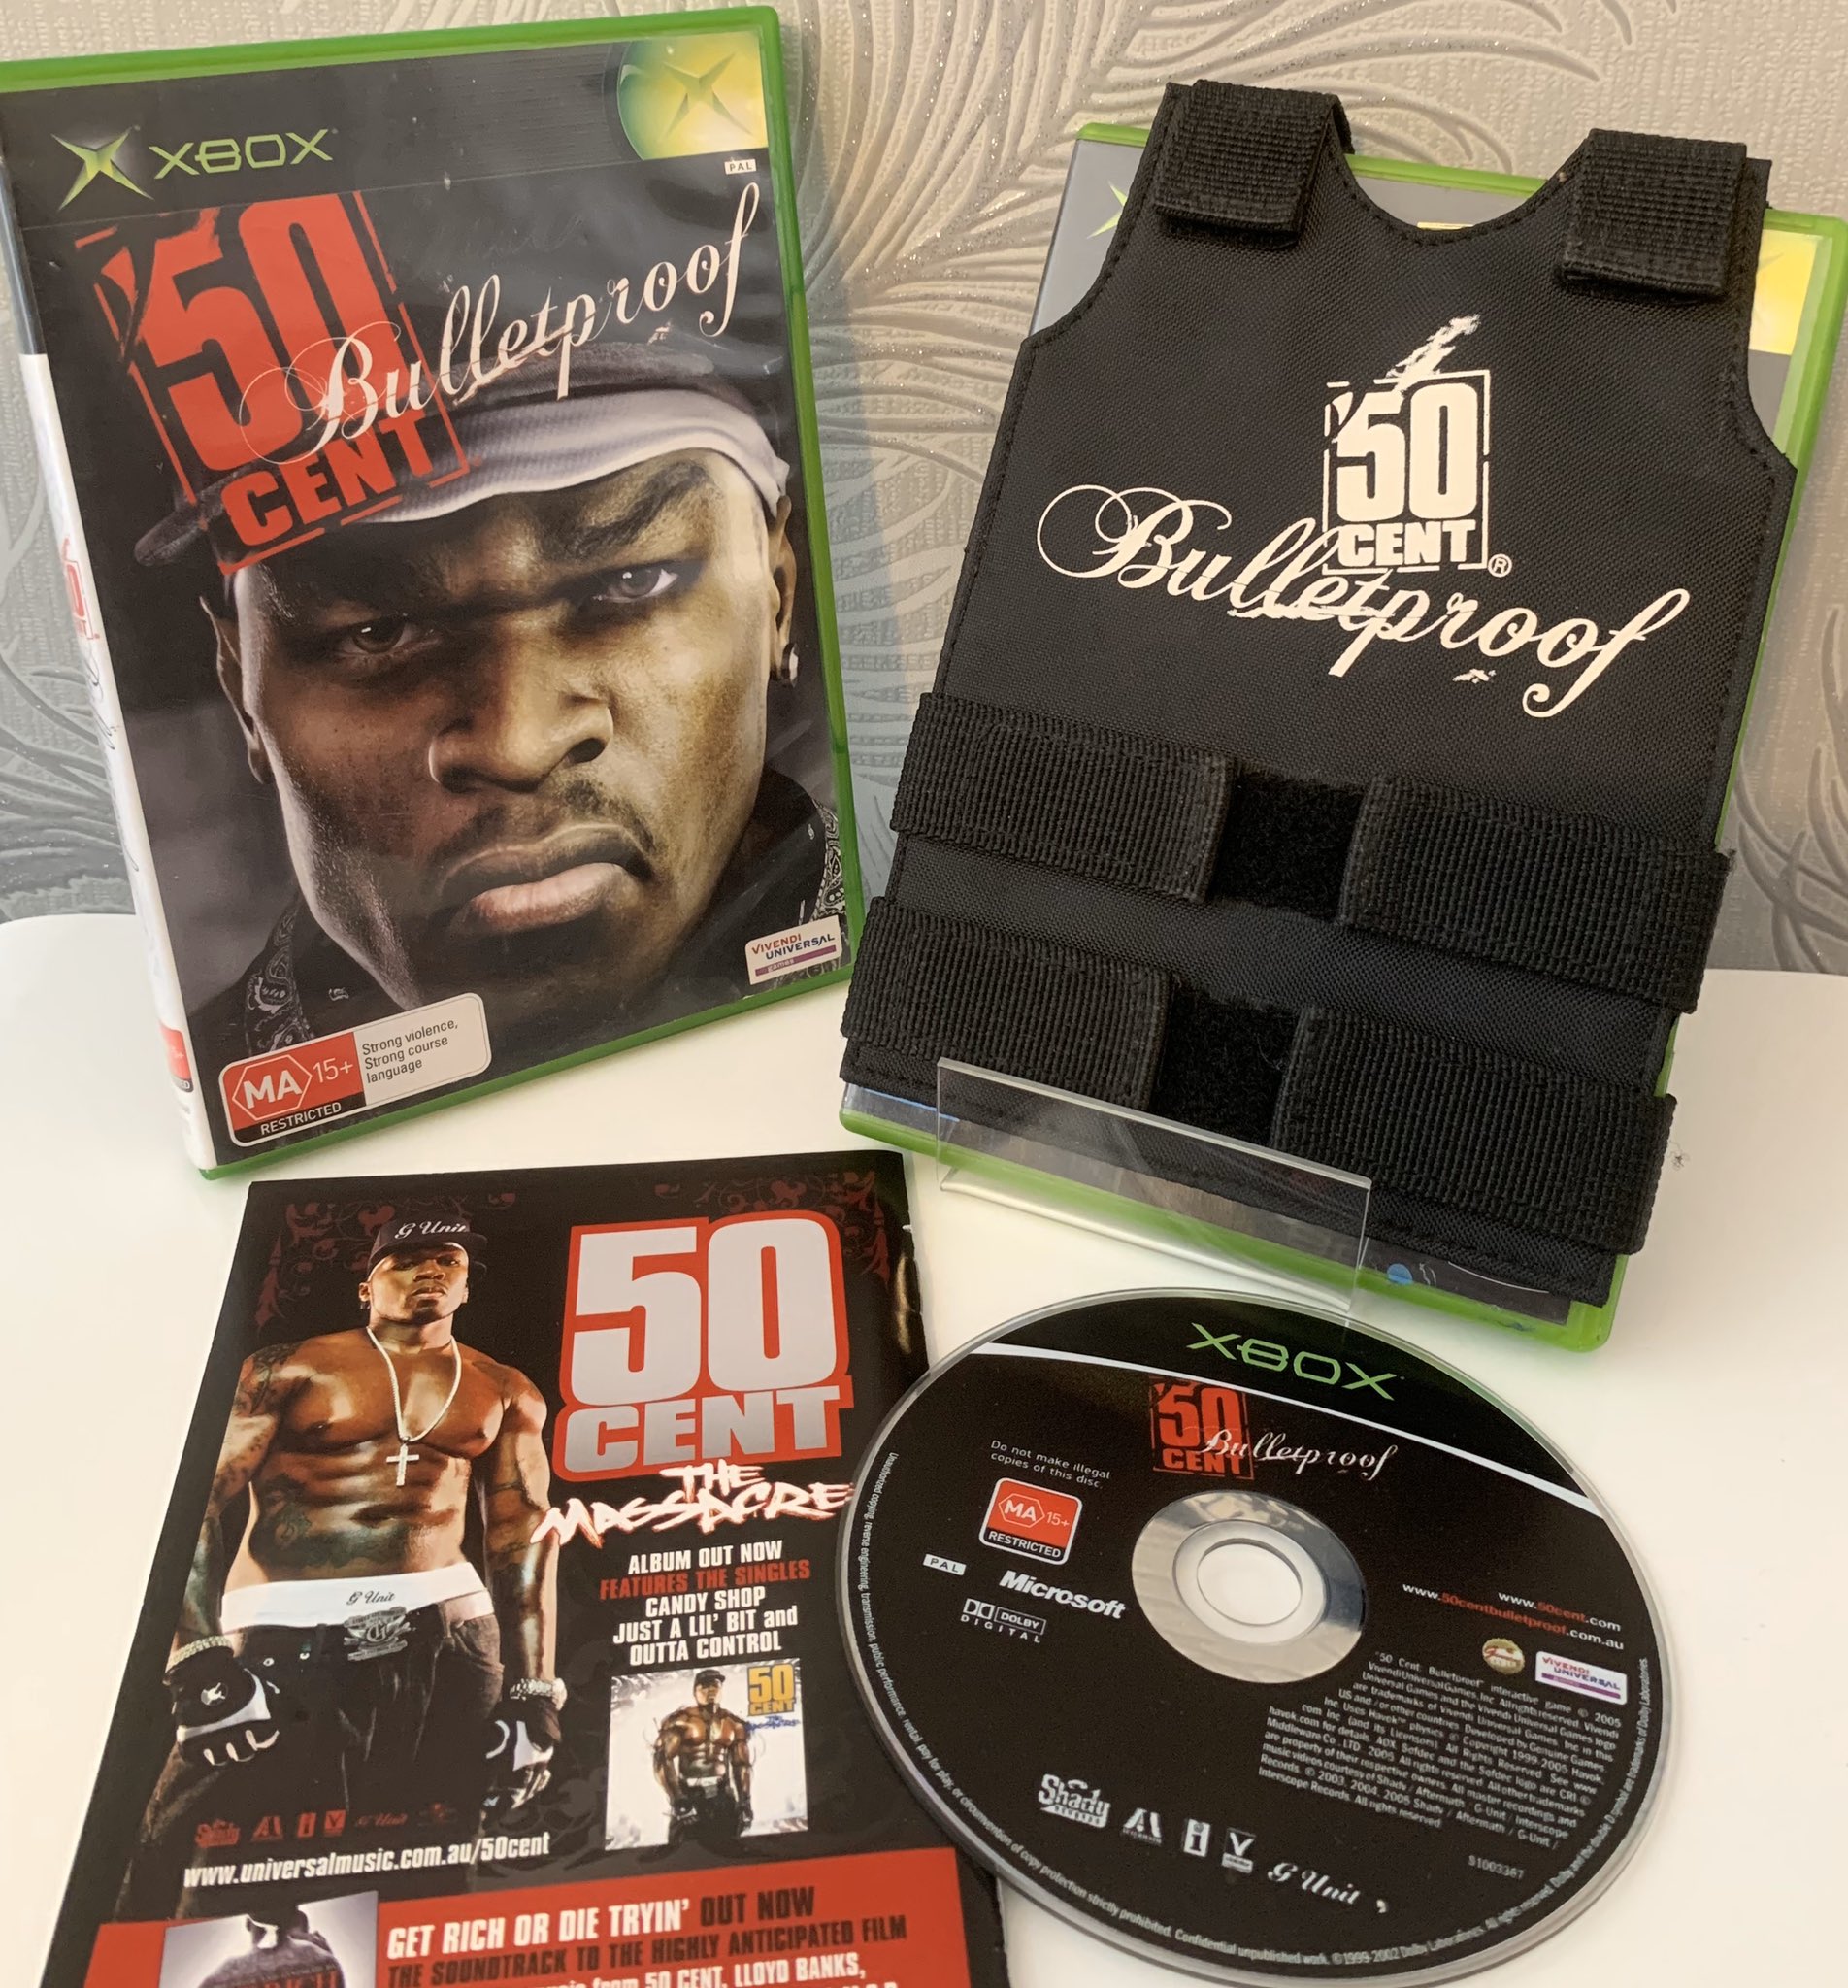 salat sekvens sagsøger 🅇🄱🄾🅇 COLLECTOR 🏴󠁧󠁢󠁥󠁮󠁧󠁿 on Twitter: "A Rare Promotional item is  this one. The 50 Cent Bulletproof Vest 😎 Don't see many of these that's  for sure . #50cent #originalxbox #gaming #rare @Xbox @